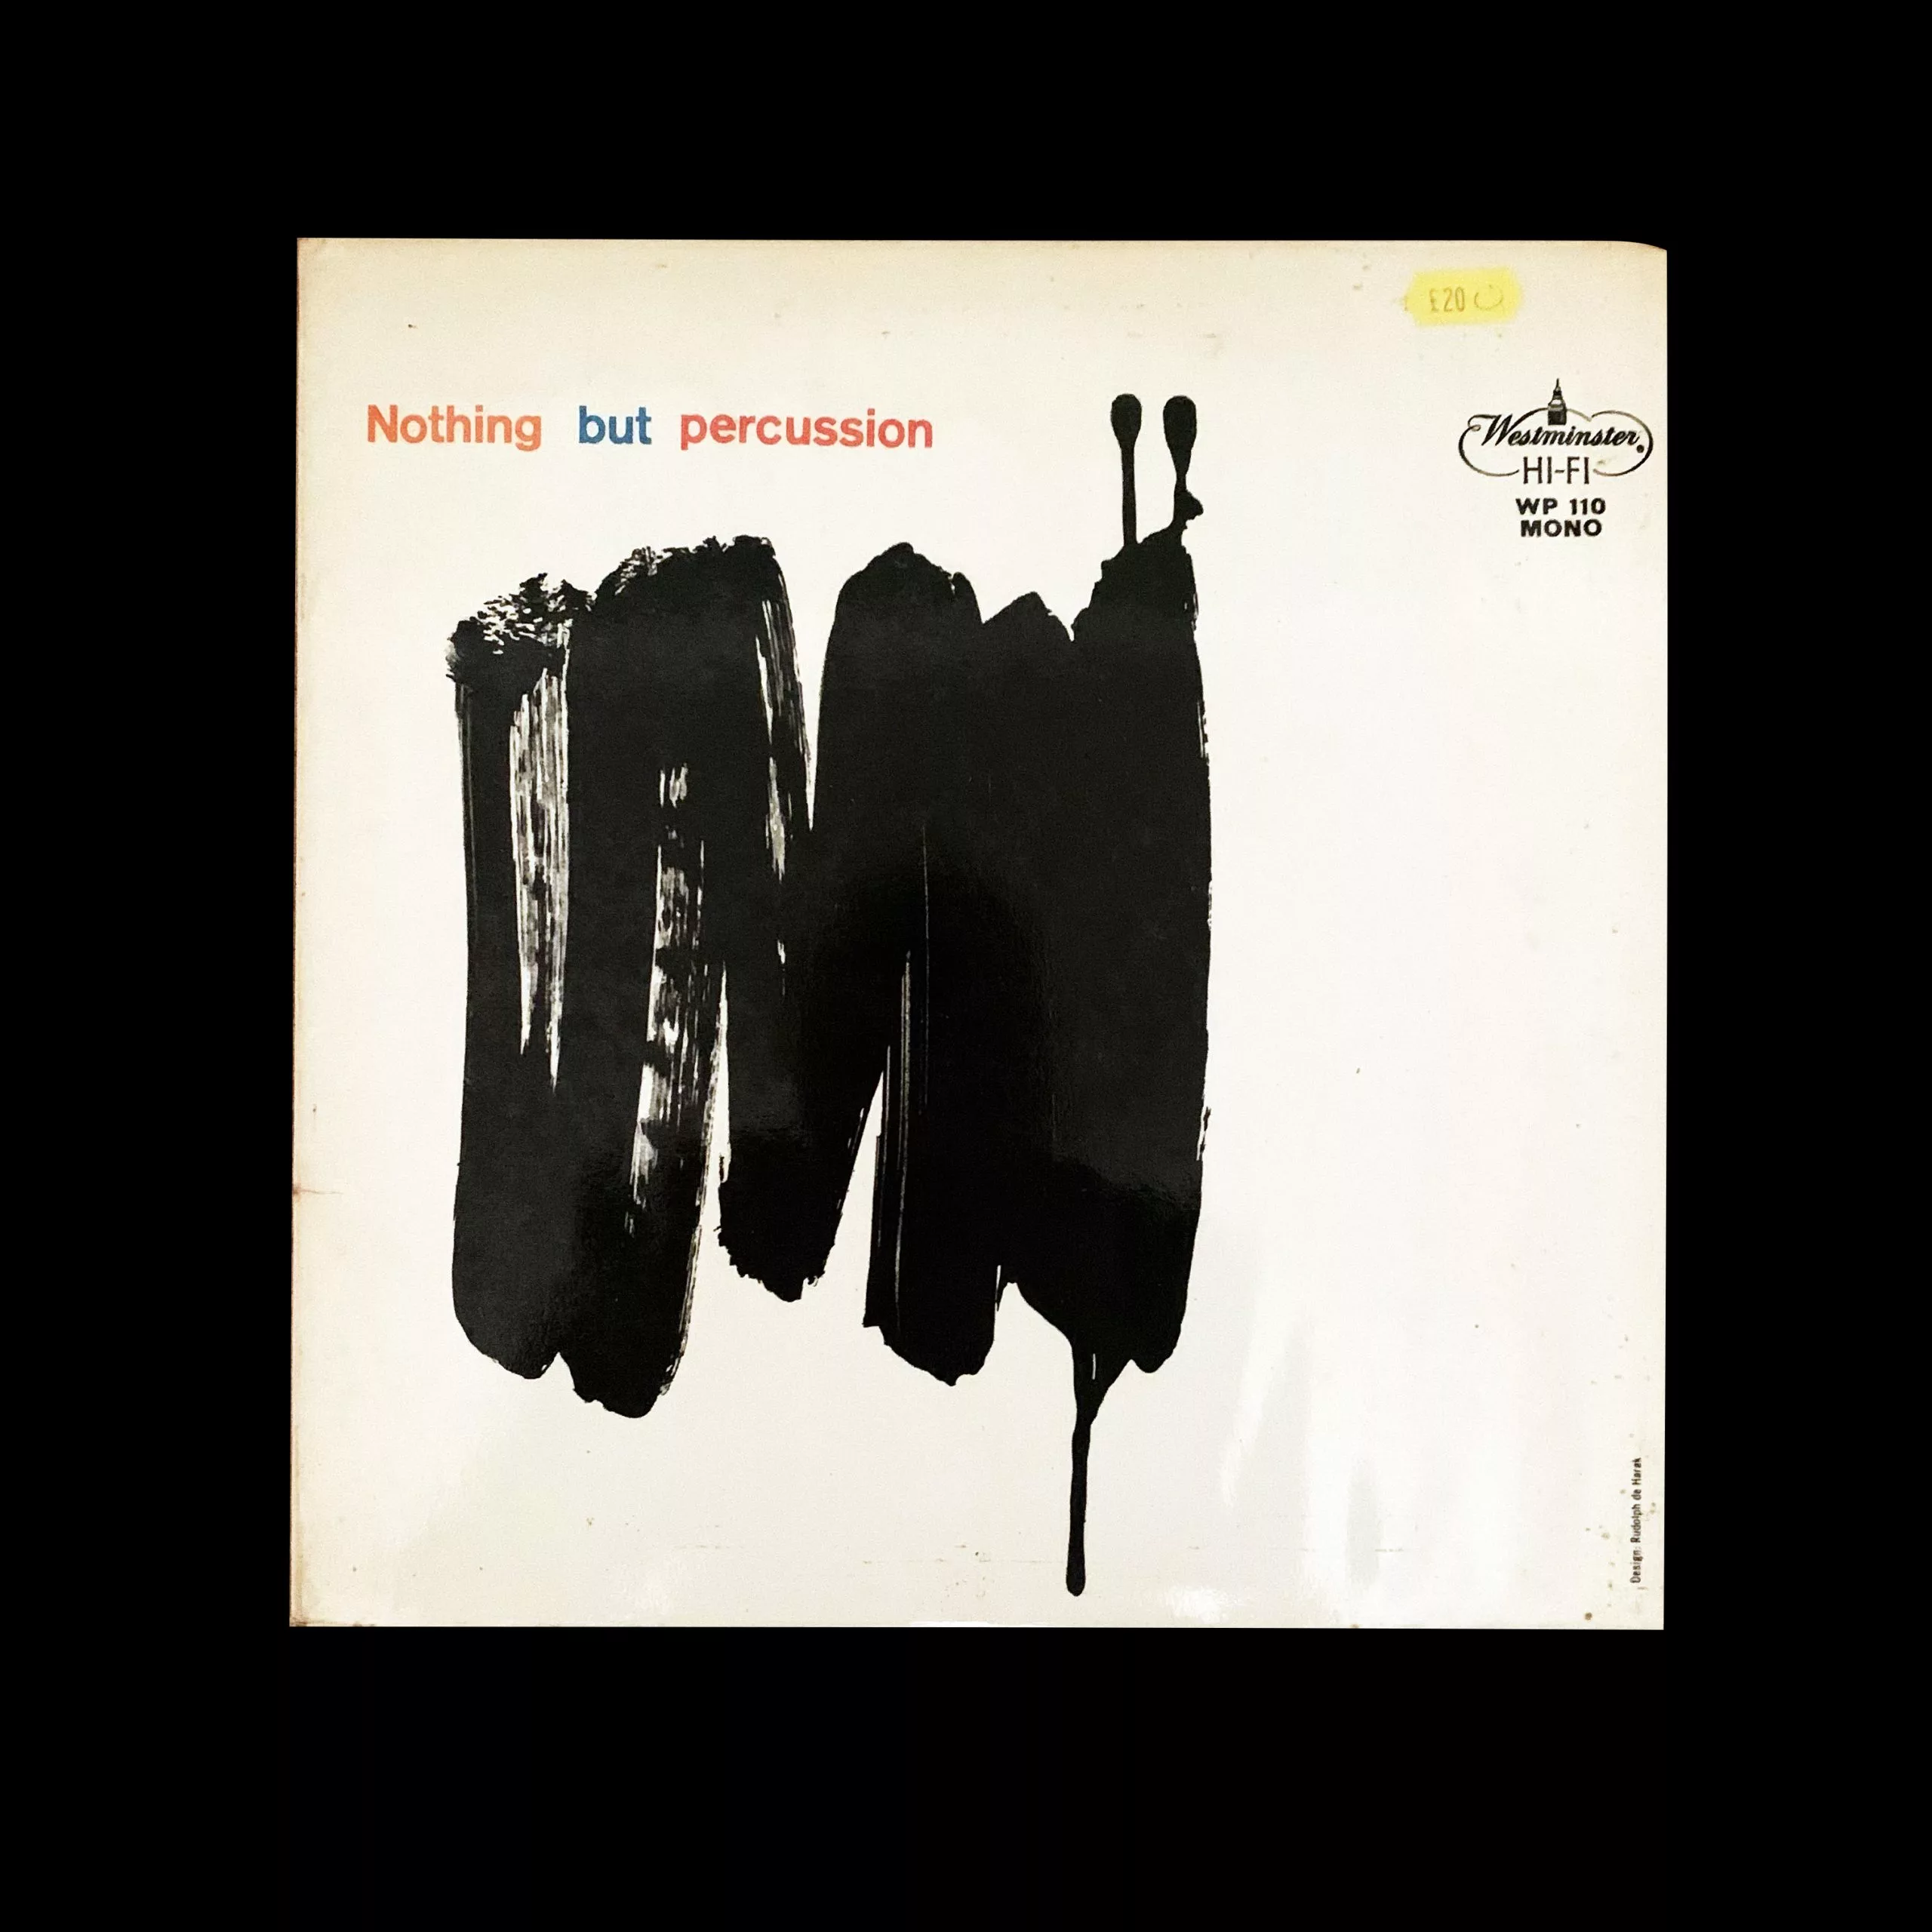 Nothing but percussion, Westminster records Design by Rudolph de Harak